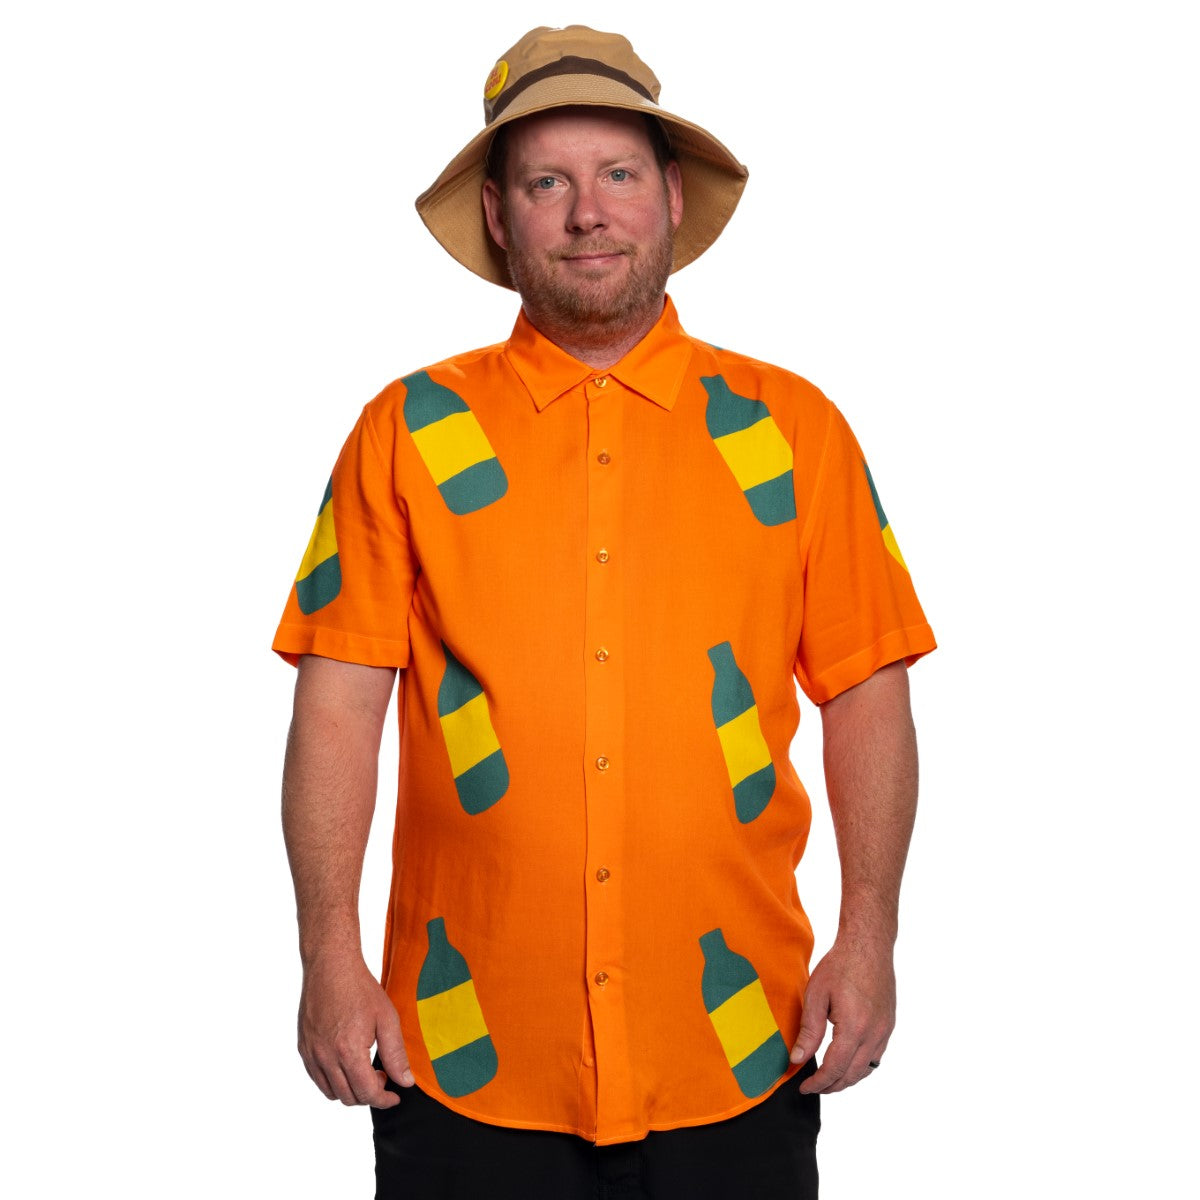 South Colorado Orange Kid Halloween Costume Shirt Bucket Hat and Pin Complete Cosplay for Parties